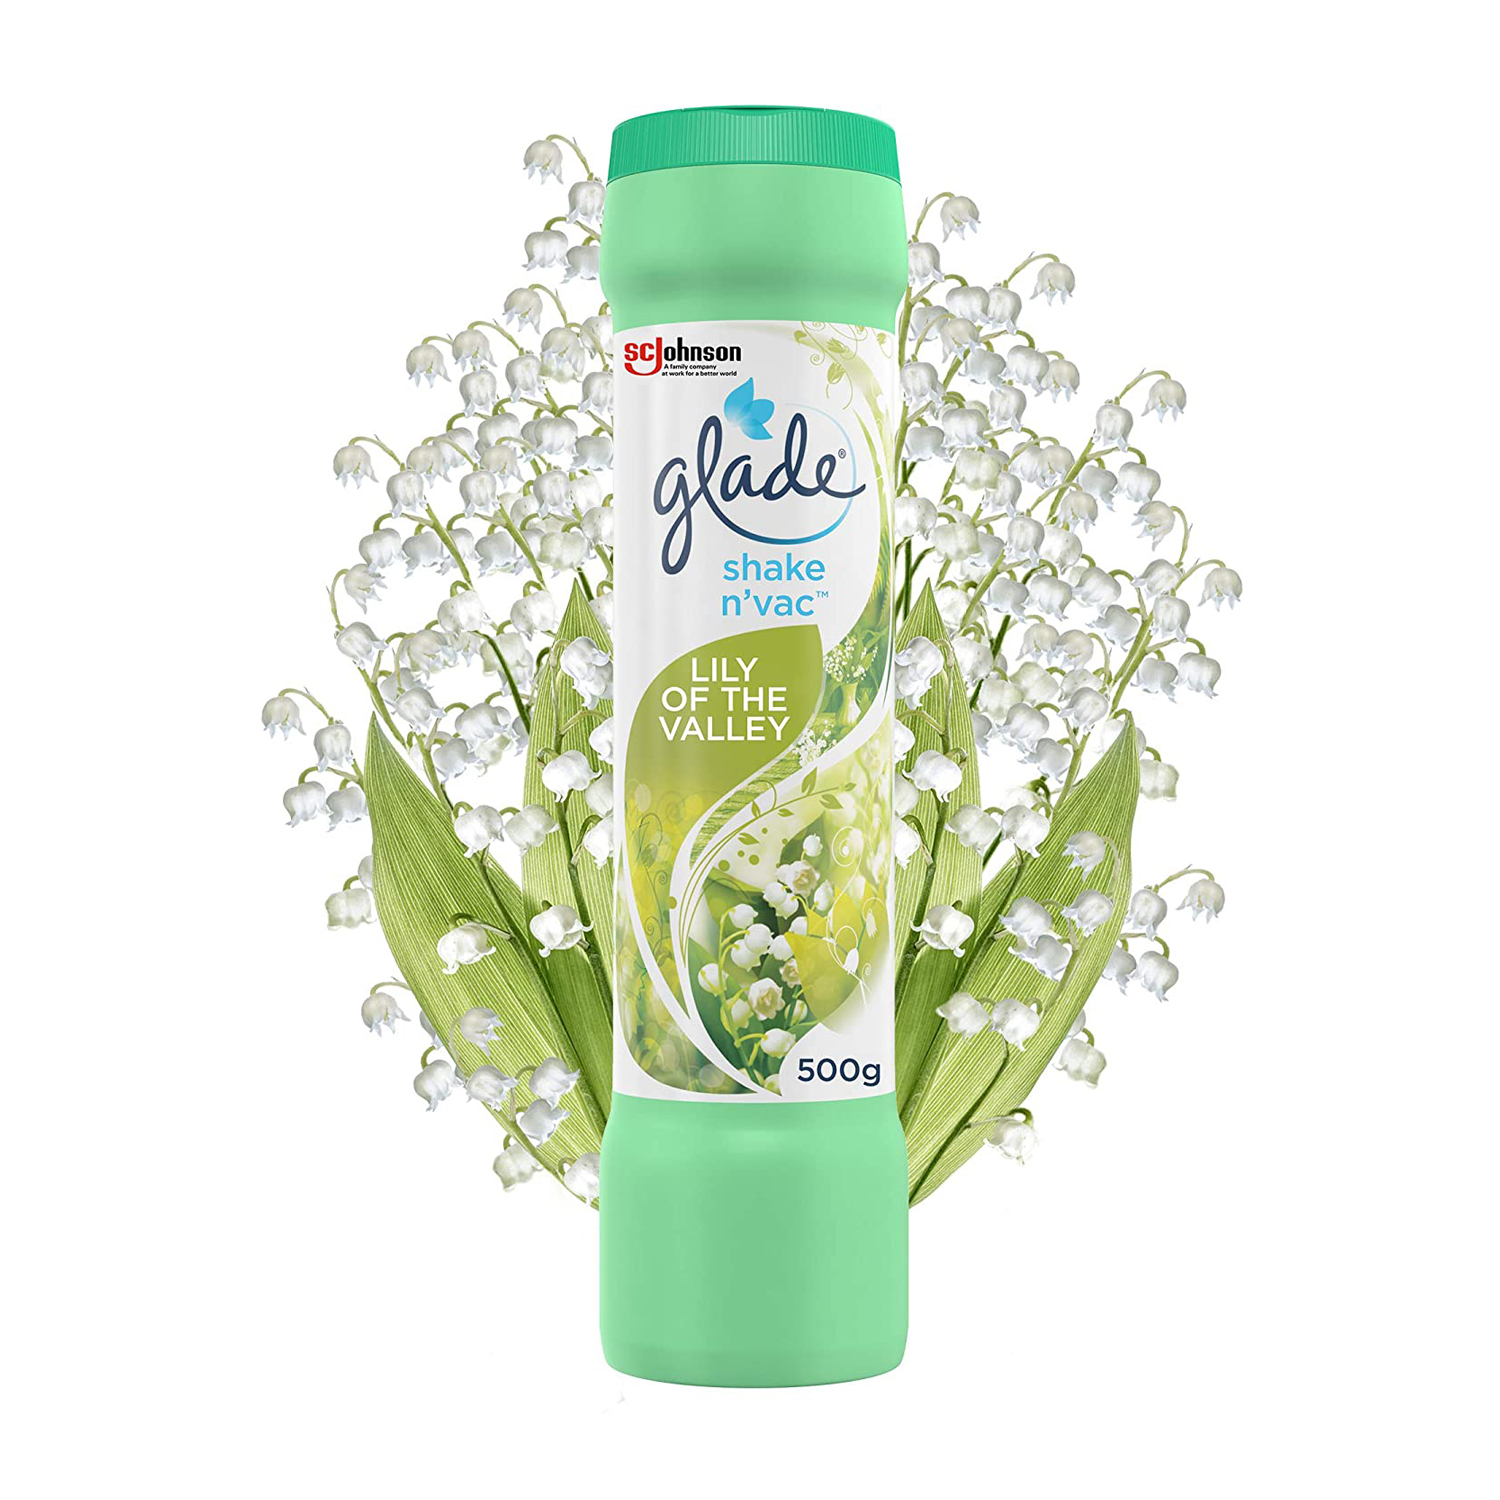 Johnson's Glade Shake'N'Vac Lily of the Valley 500g